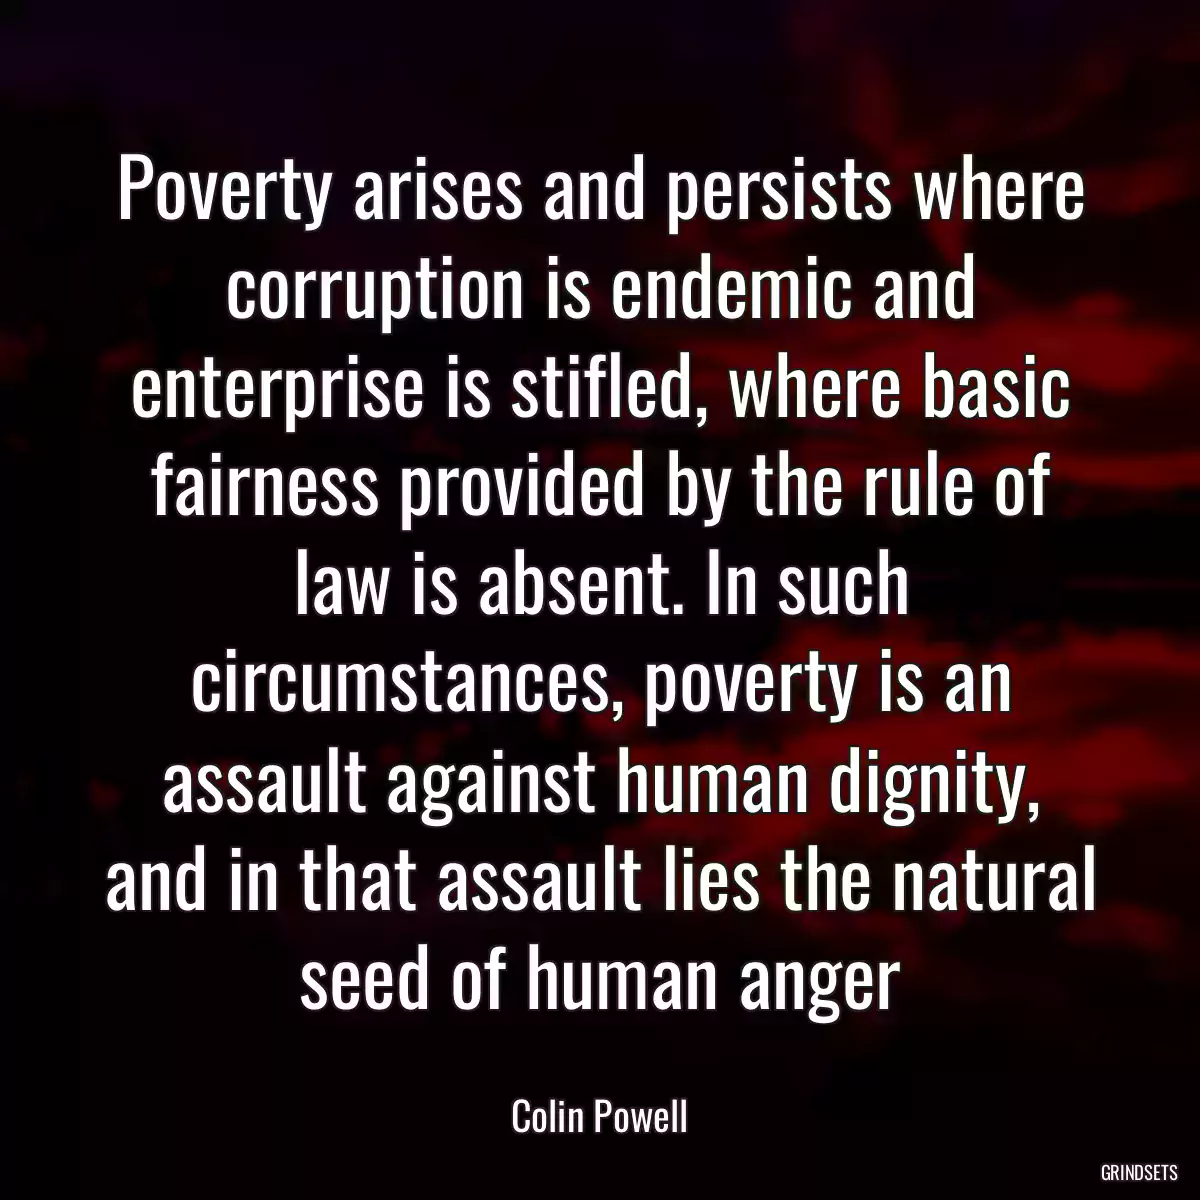 Poverty arises and persists where corruption is endemic and enterprise is stifled, where basic fairness provided by the rule of law is absent. In such circumstances, poverty is an assault against human dignity, and in that assault lies the natural seed of human anger